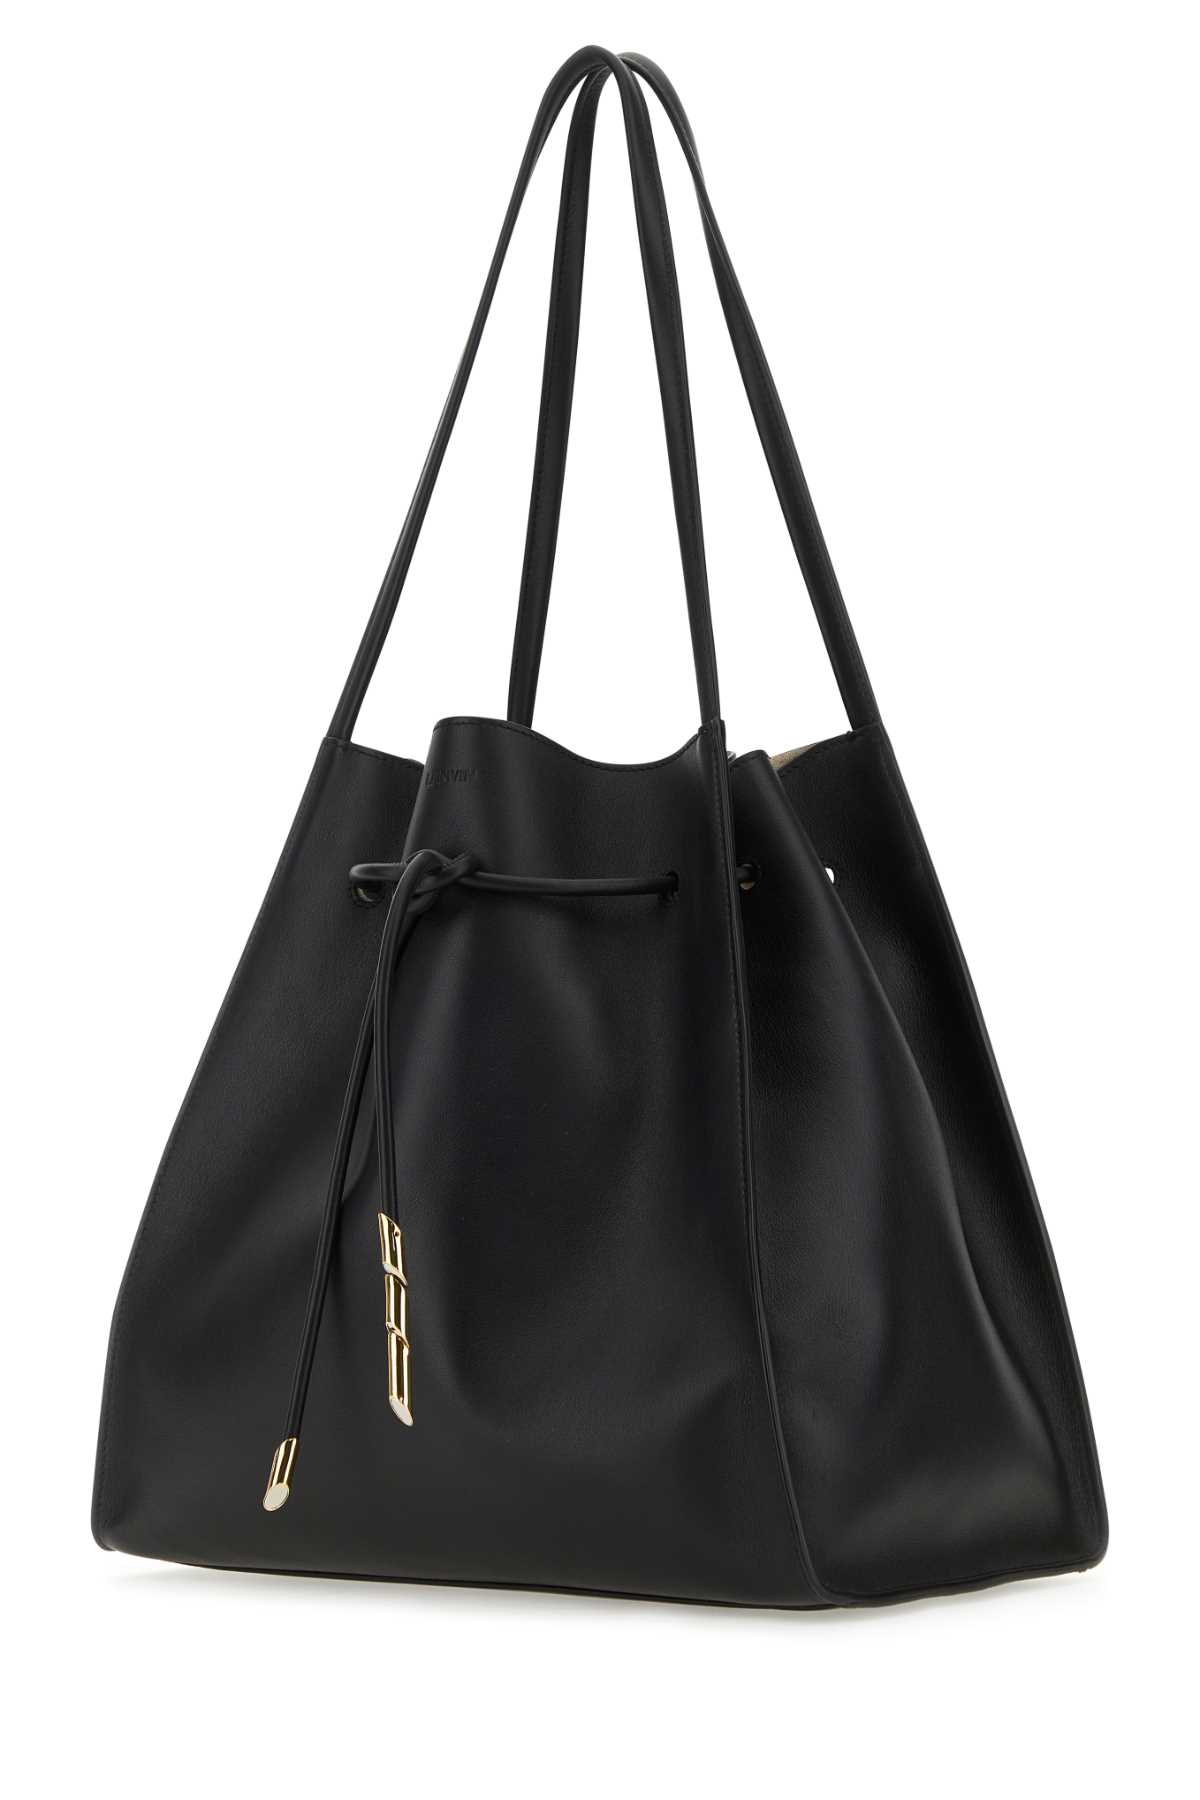 LANVIN BLACK LEATHER SEQUENCE SHOPPING BAG